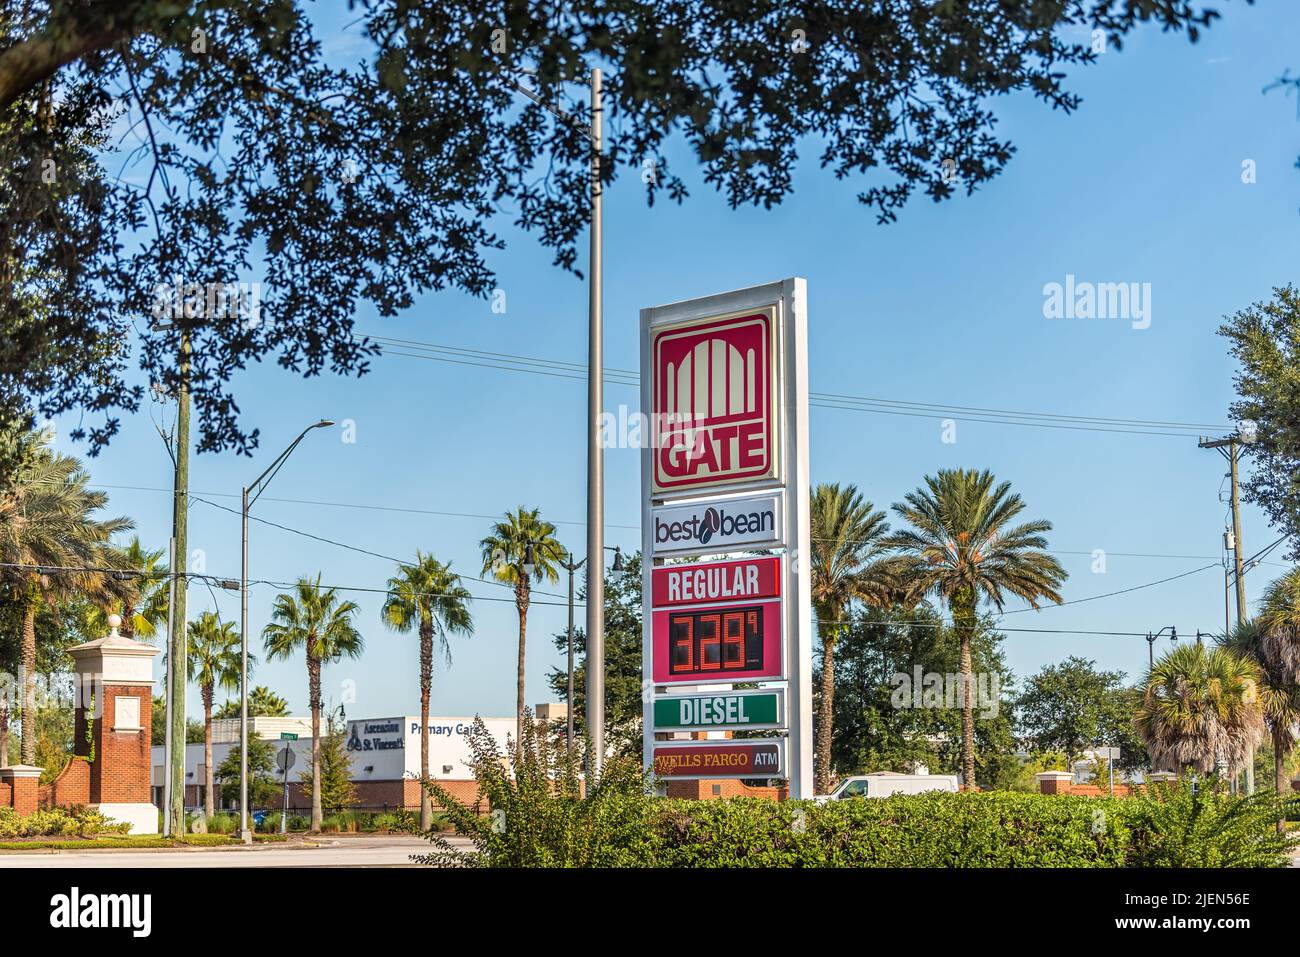 Jacksonville, USA - October 19, 2021: Sign for Gate local gas station and Best Bean coffee with diesel price and Wells Fargo ATM in north Florida down Stock Photo